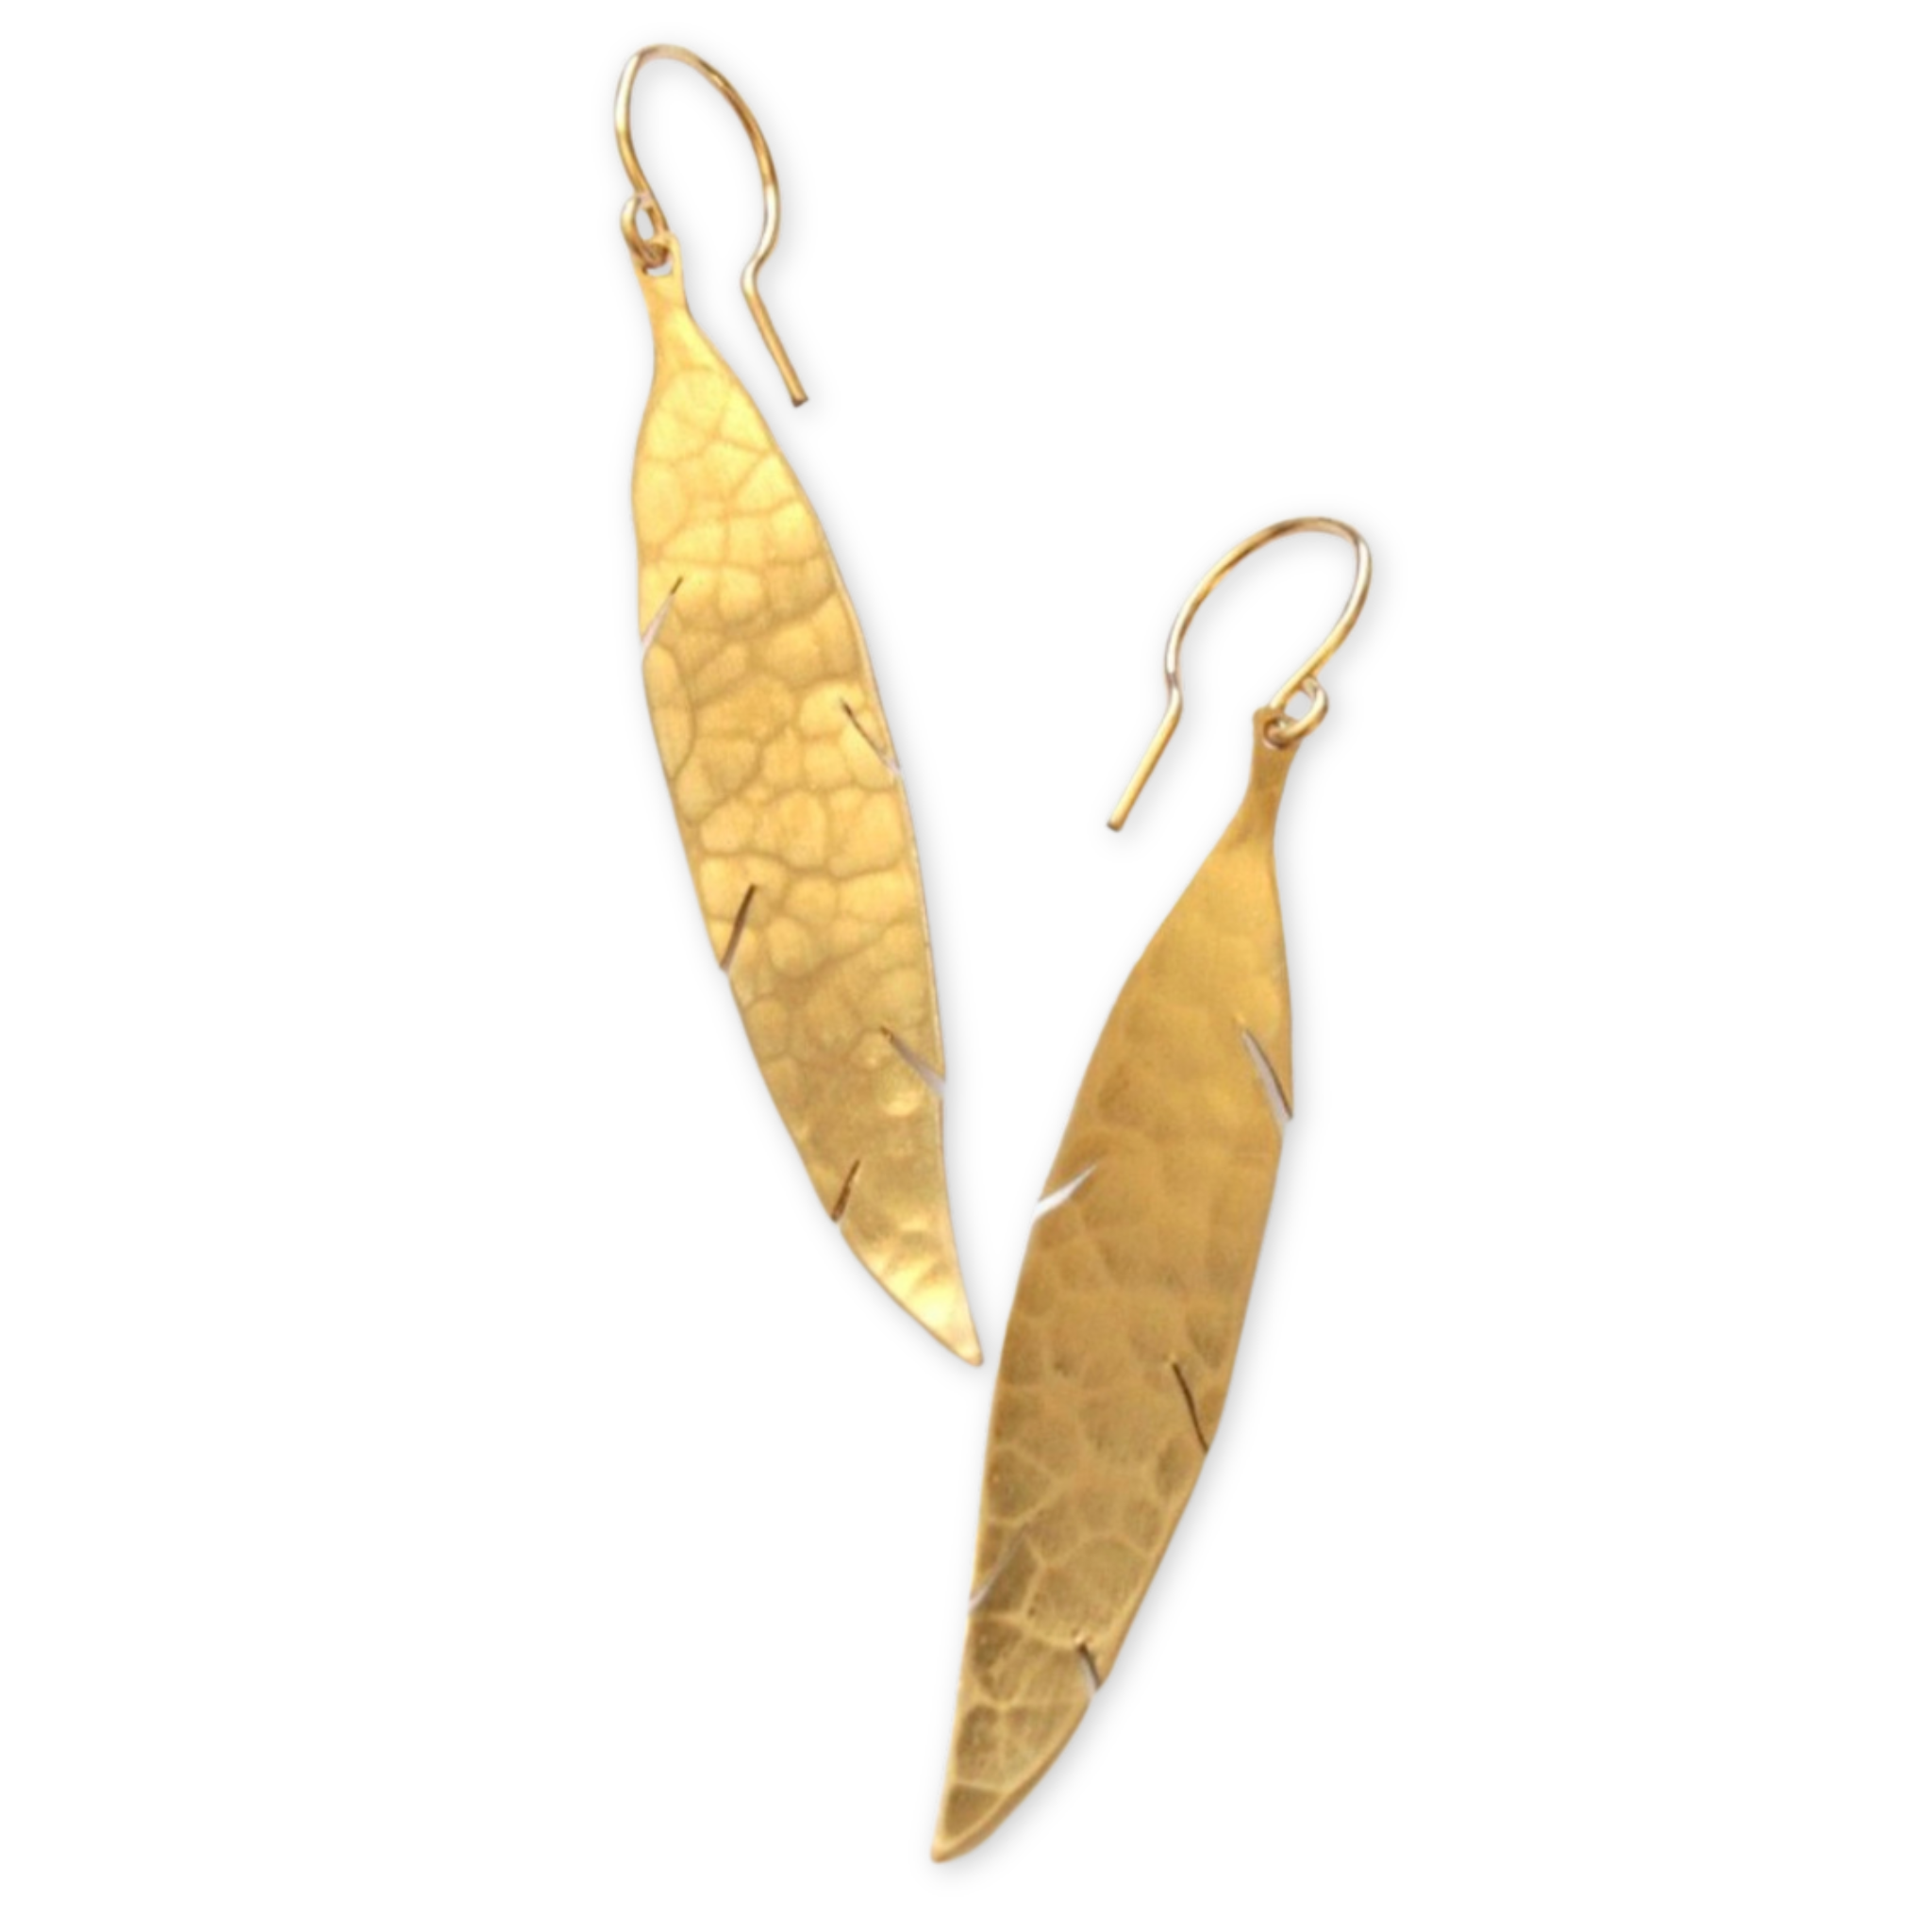 gold hammered earrings in the shape of feathers